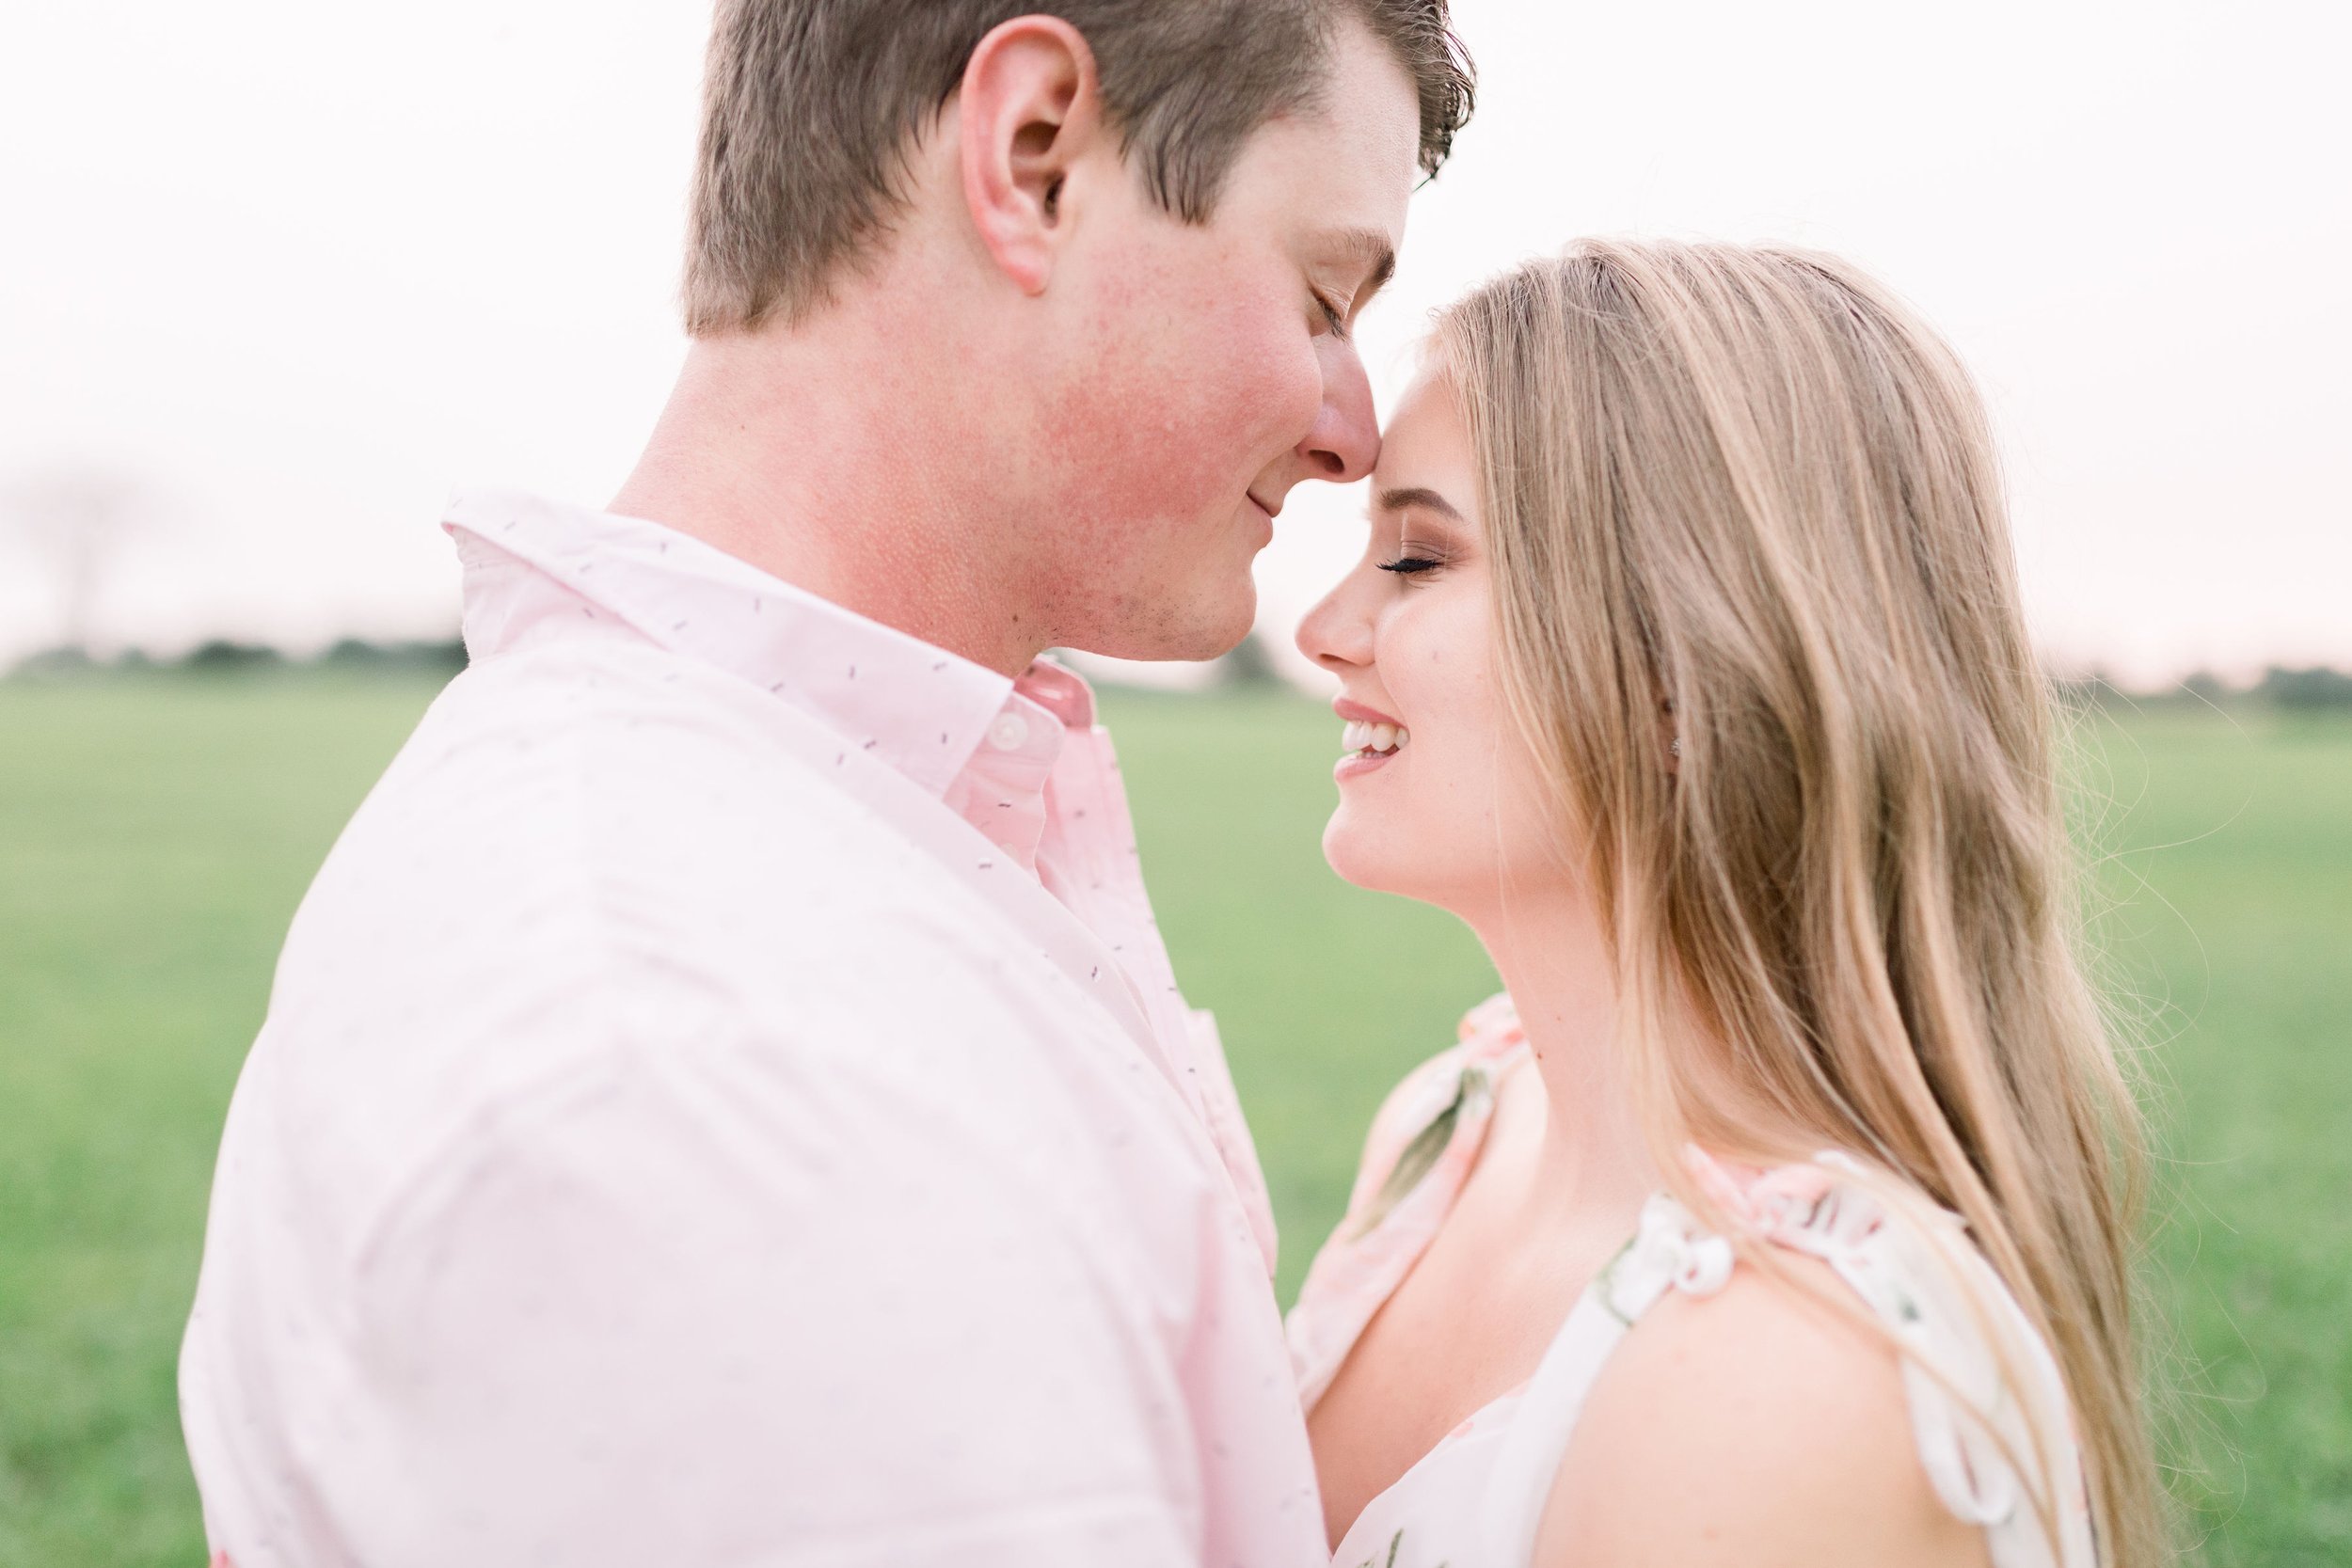  In a pink button-up shirt, a man goes in for a kiss by Chelsea Mason Photography. photographer grass field detailed couple shots Spring outfits #ChelseaMasonPhotography #ChelseaMasonEngagements #PinheysPointEngagements #OttawaEngagementPhotography 